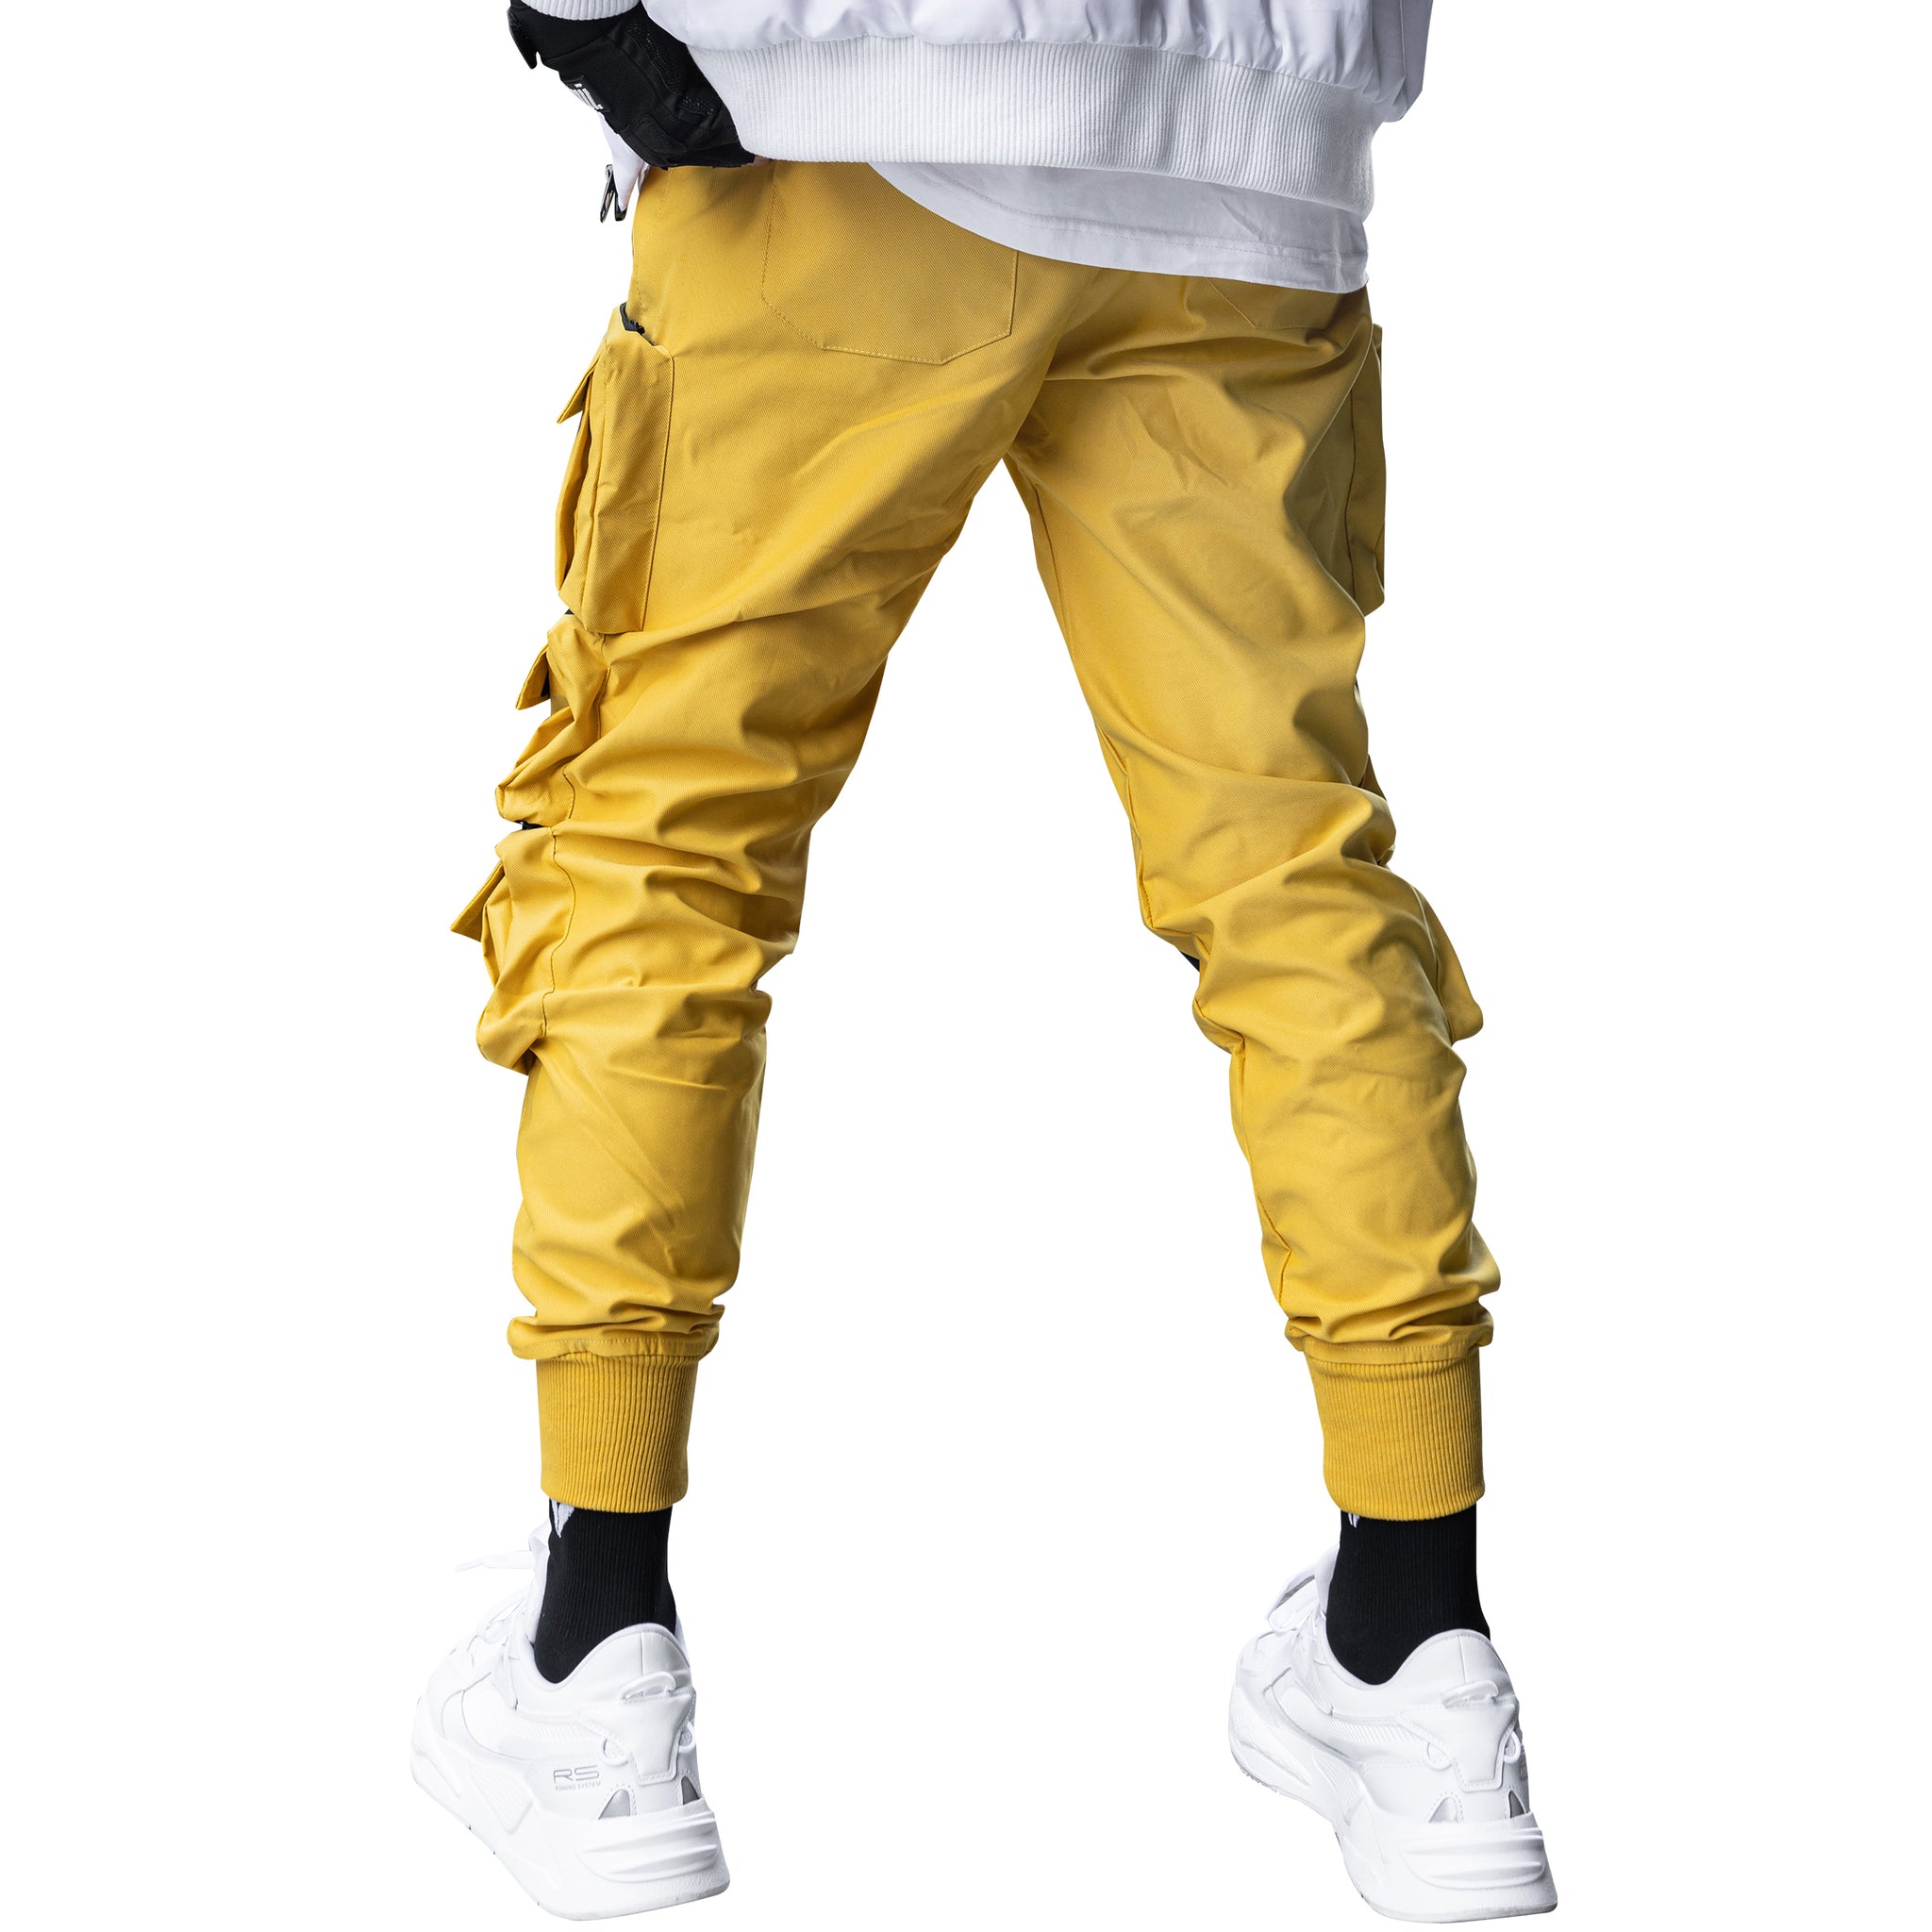 Yellow Cargo Pants Outfits (8 ideas & outfits) | Lookastic